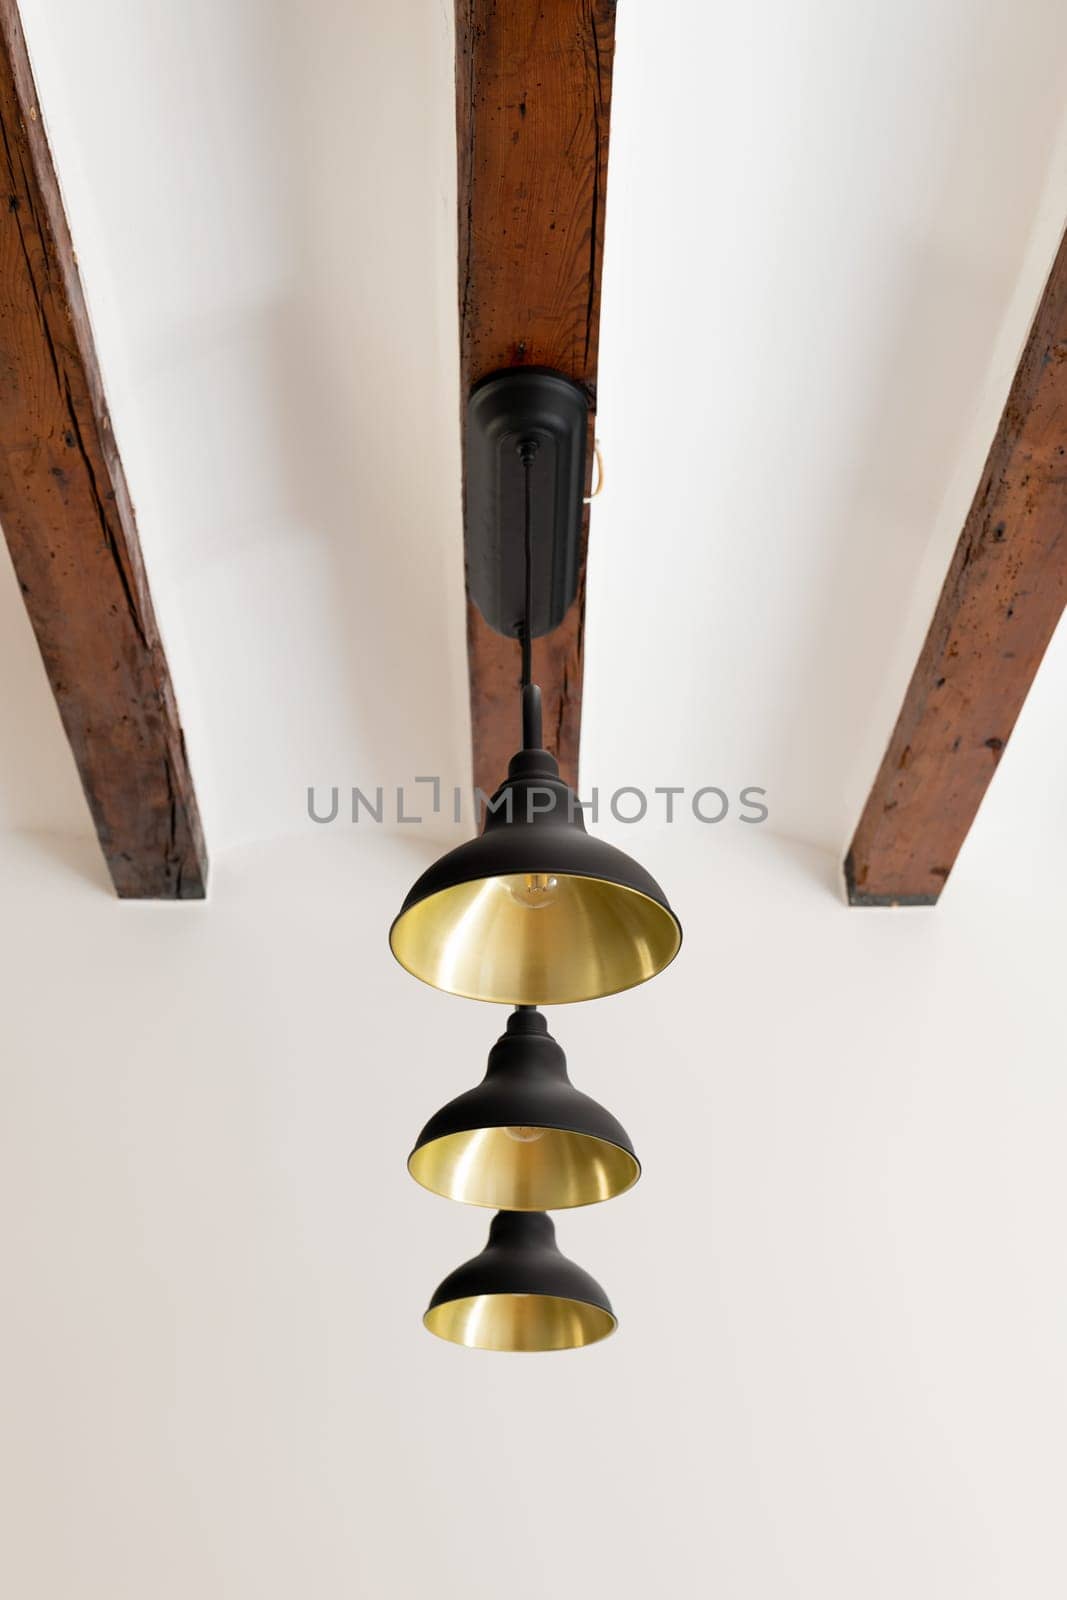 Metal chandelier with light-bulbs fastened to old wooden ceiling beam. Home light equipment in interior design. Vintage element of decor